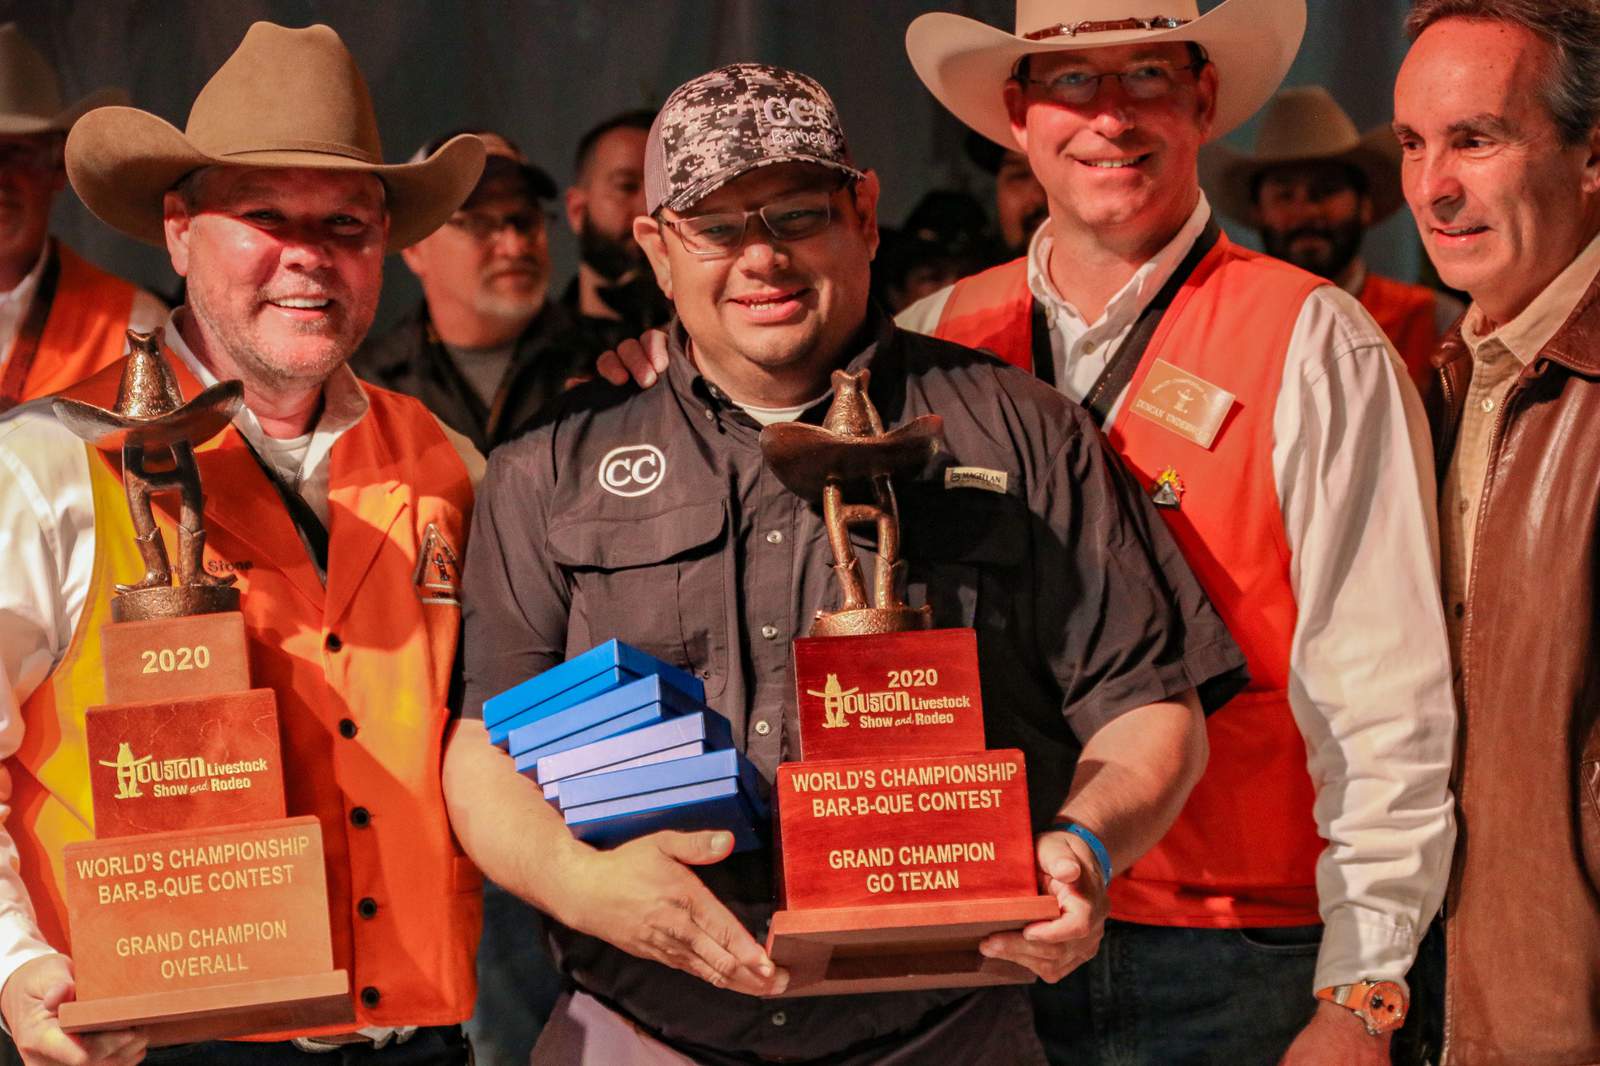 Here are all the winners of the Houston Rodeo 2020 World’s Championship BBQ Contest